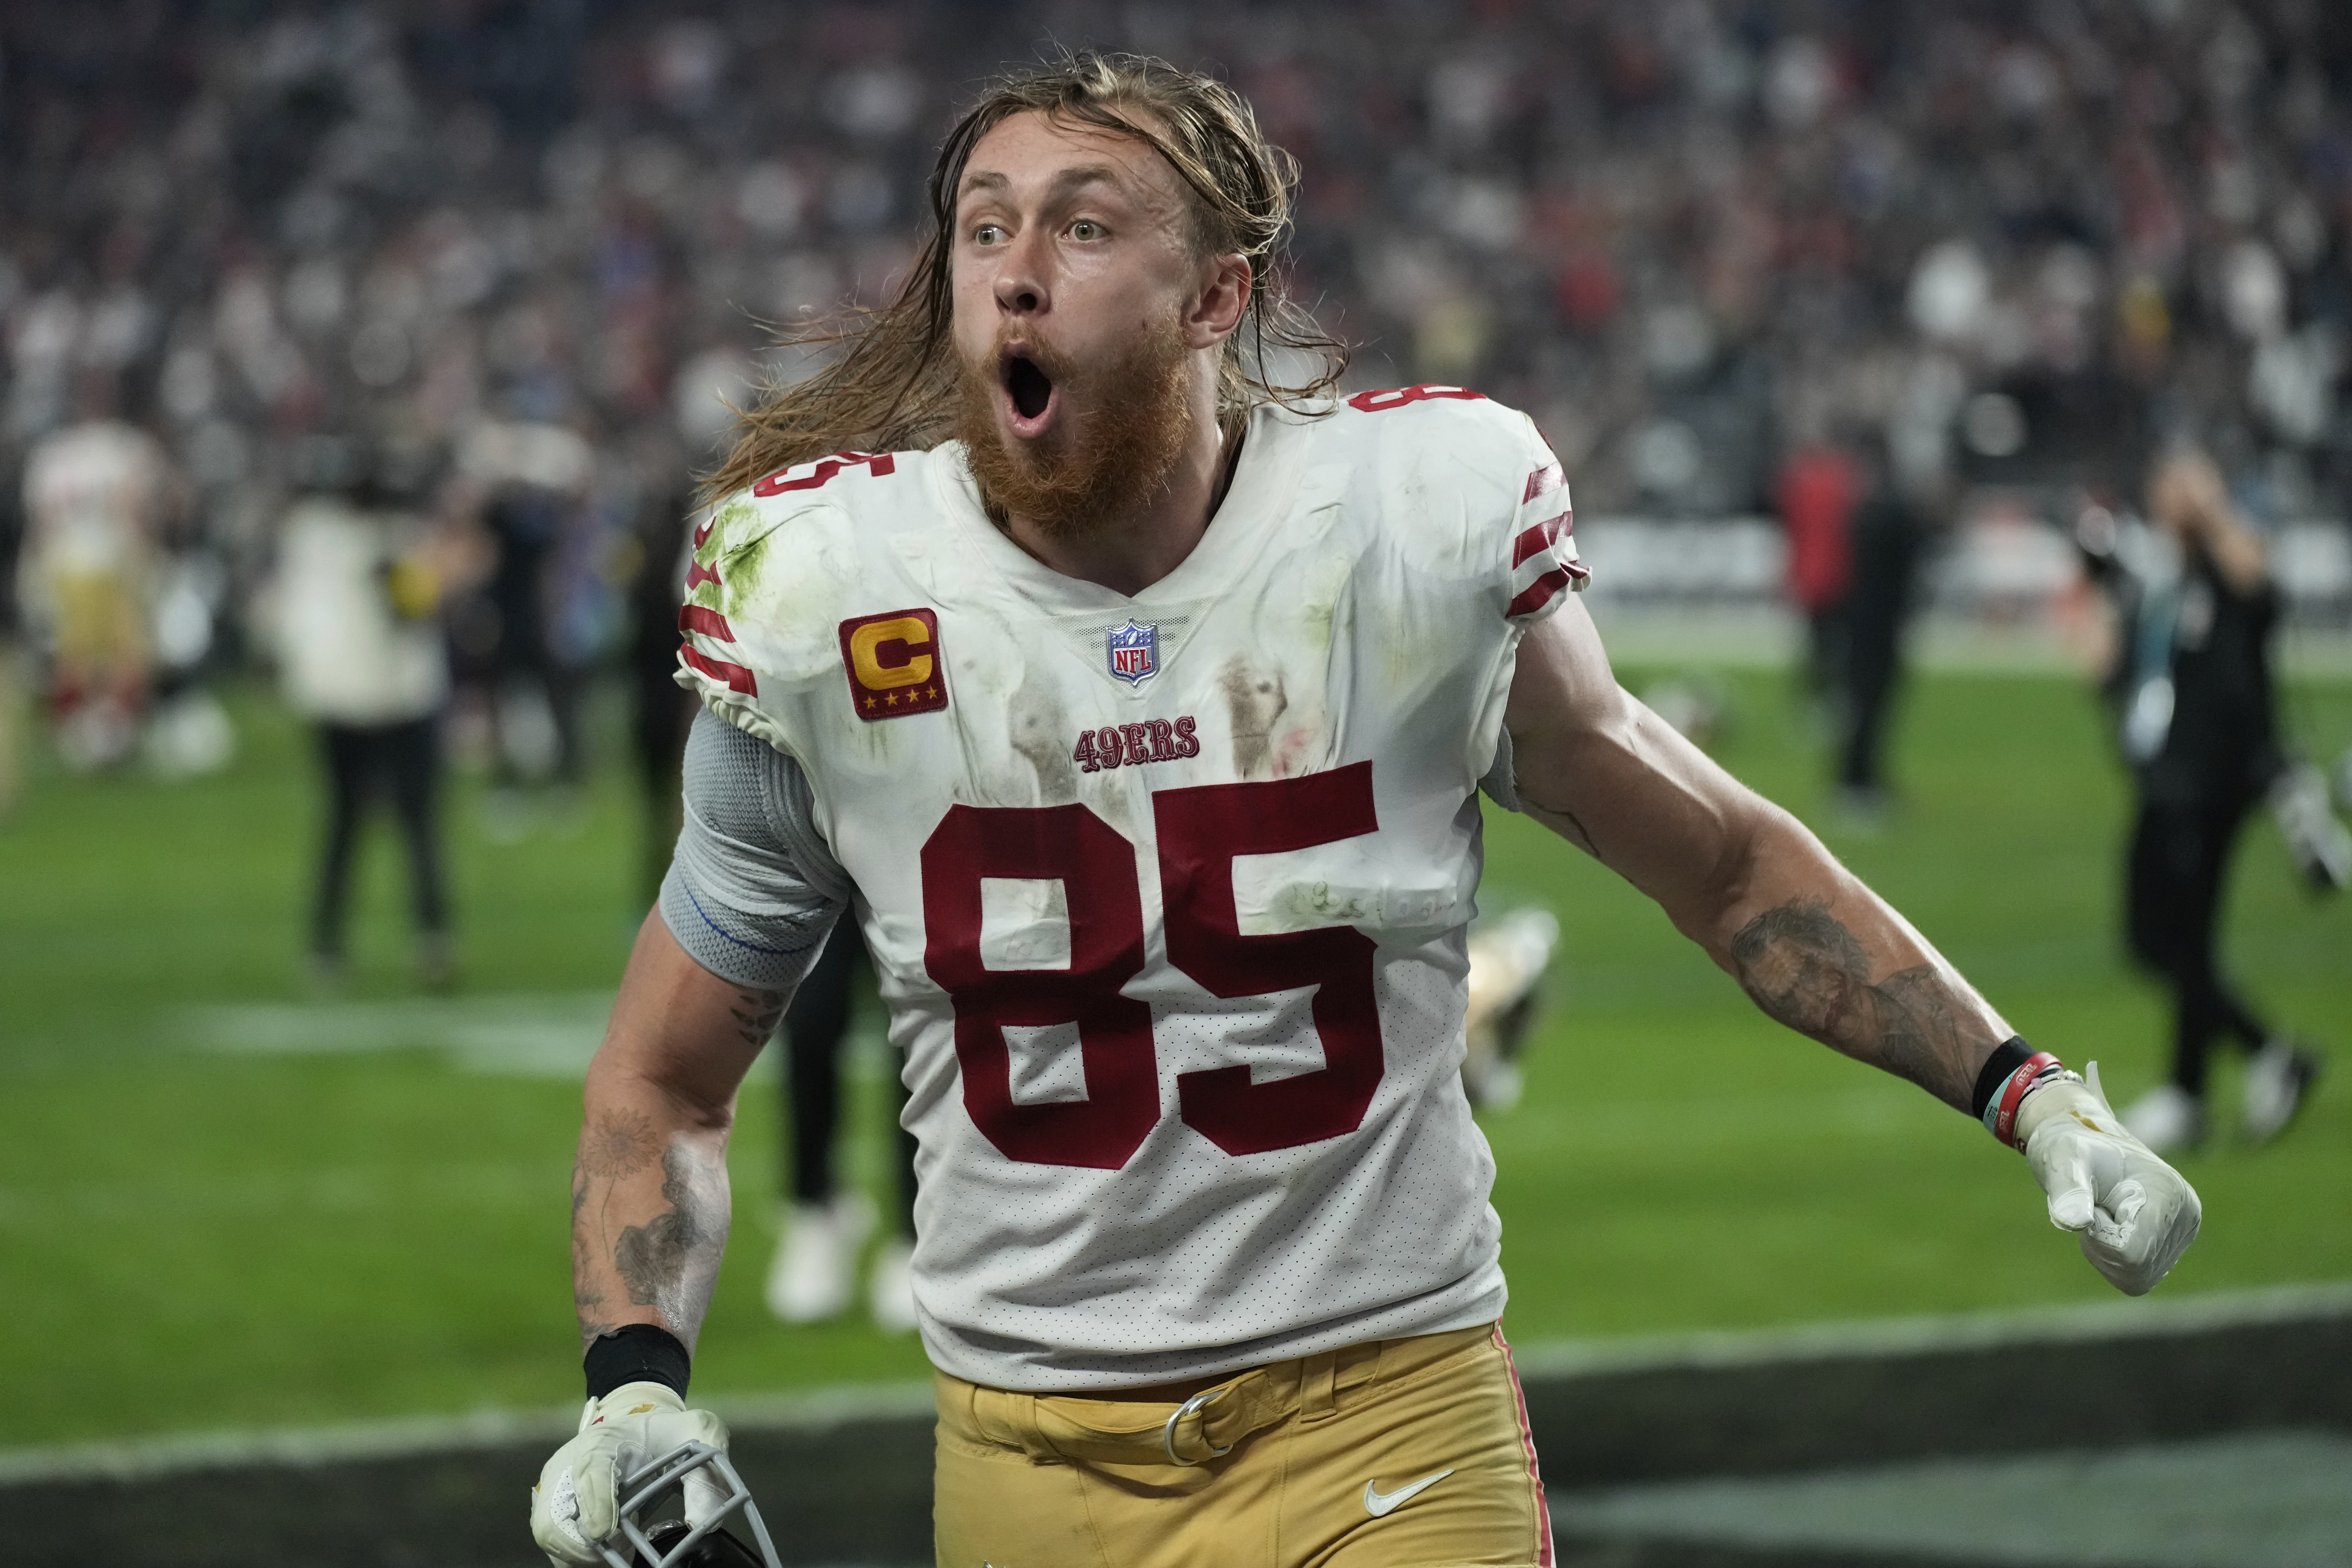 49ers-Raiders practice: George Kittle, Greenlaw, McCloud out injured